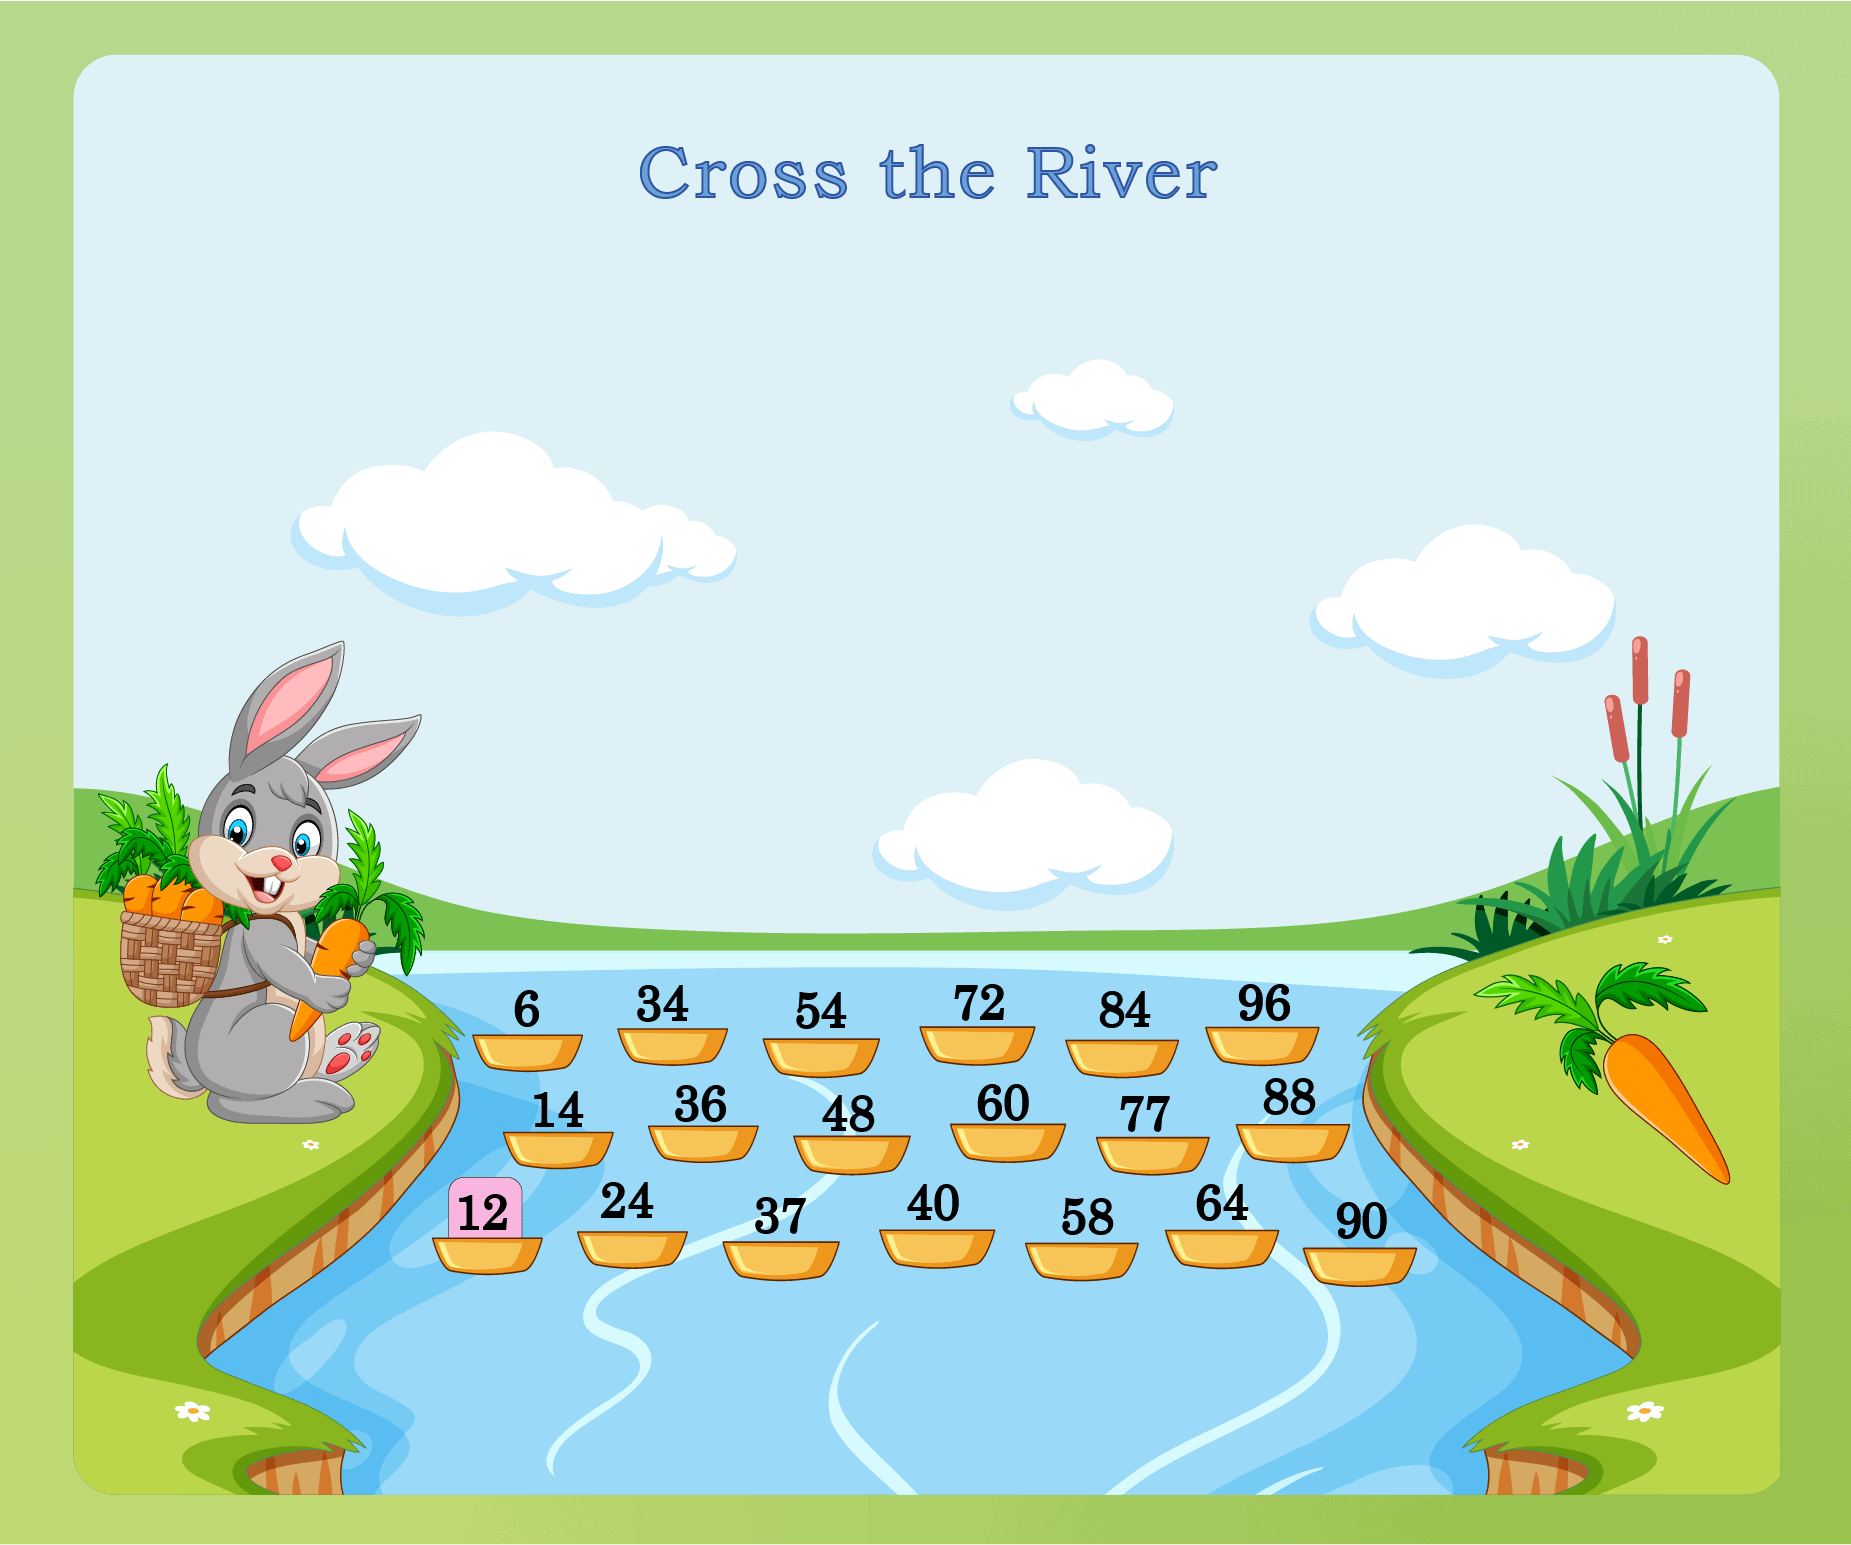 Cross the river counting by 12s